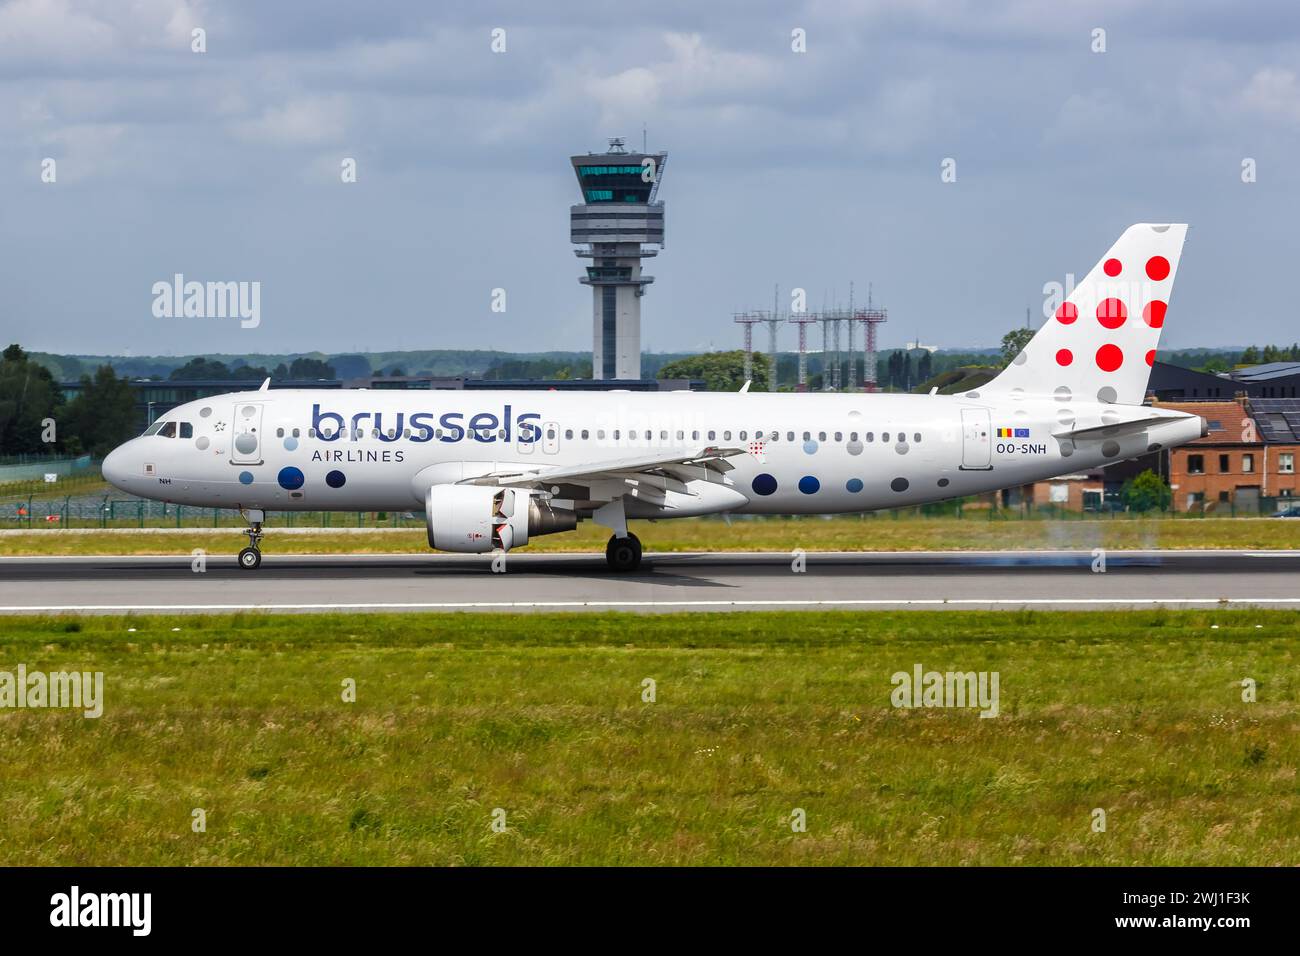 Brussels Airlines Airbus A320 Flugzeuge Brussels Airport in Belgien Stockfoto